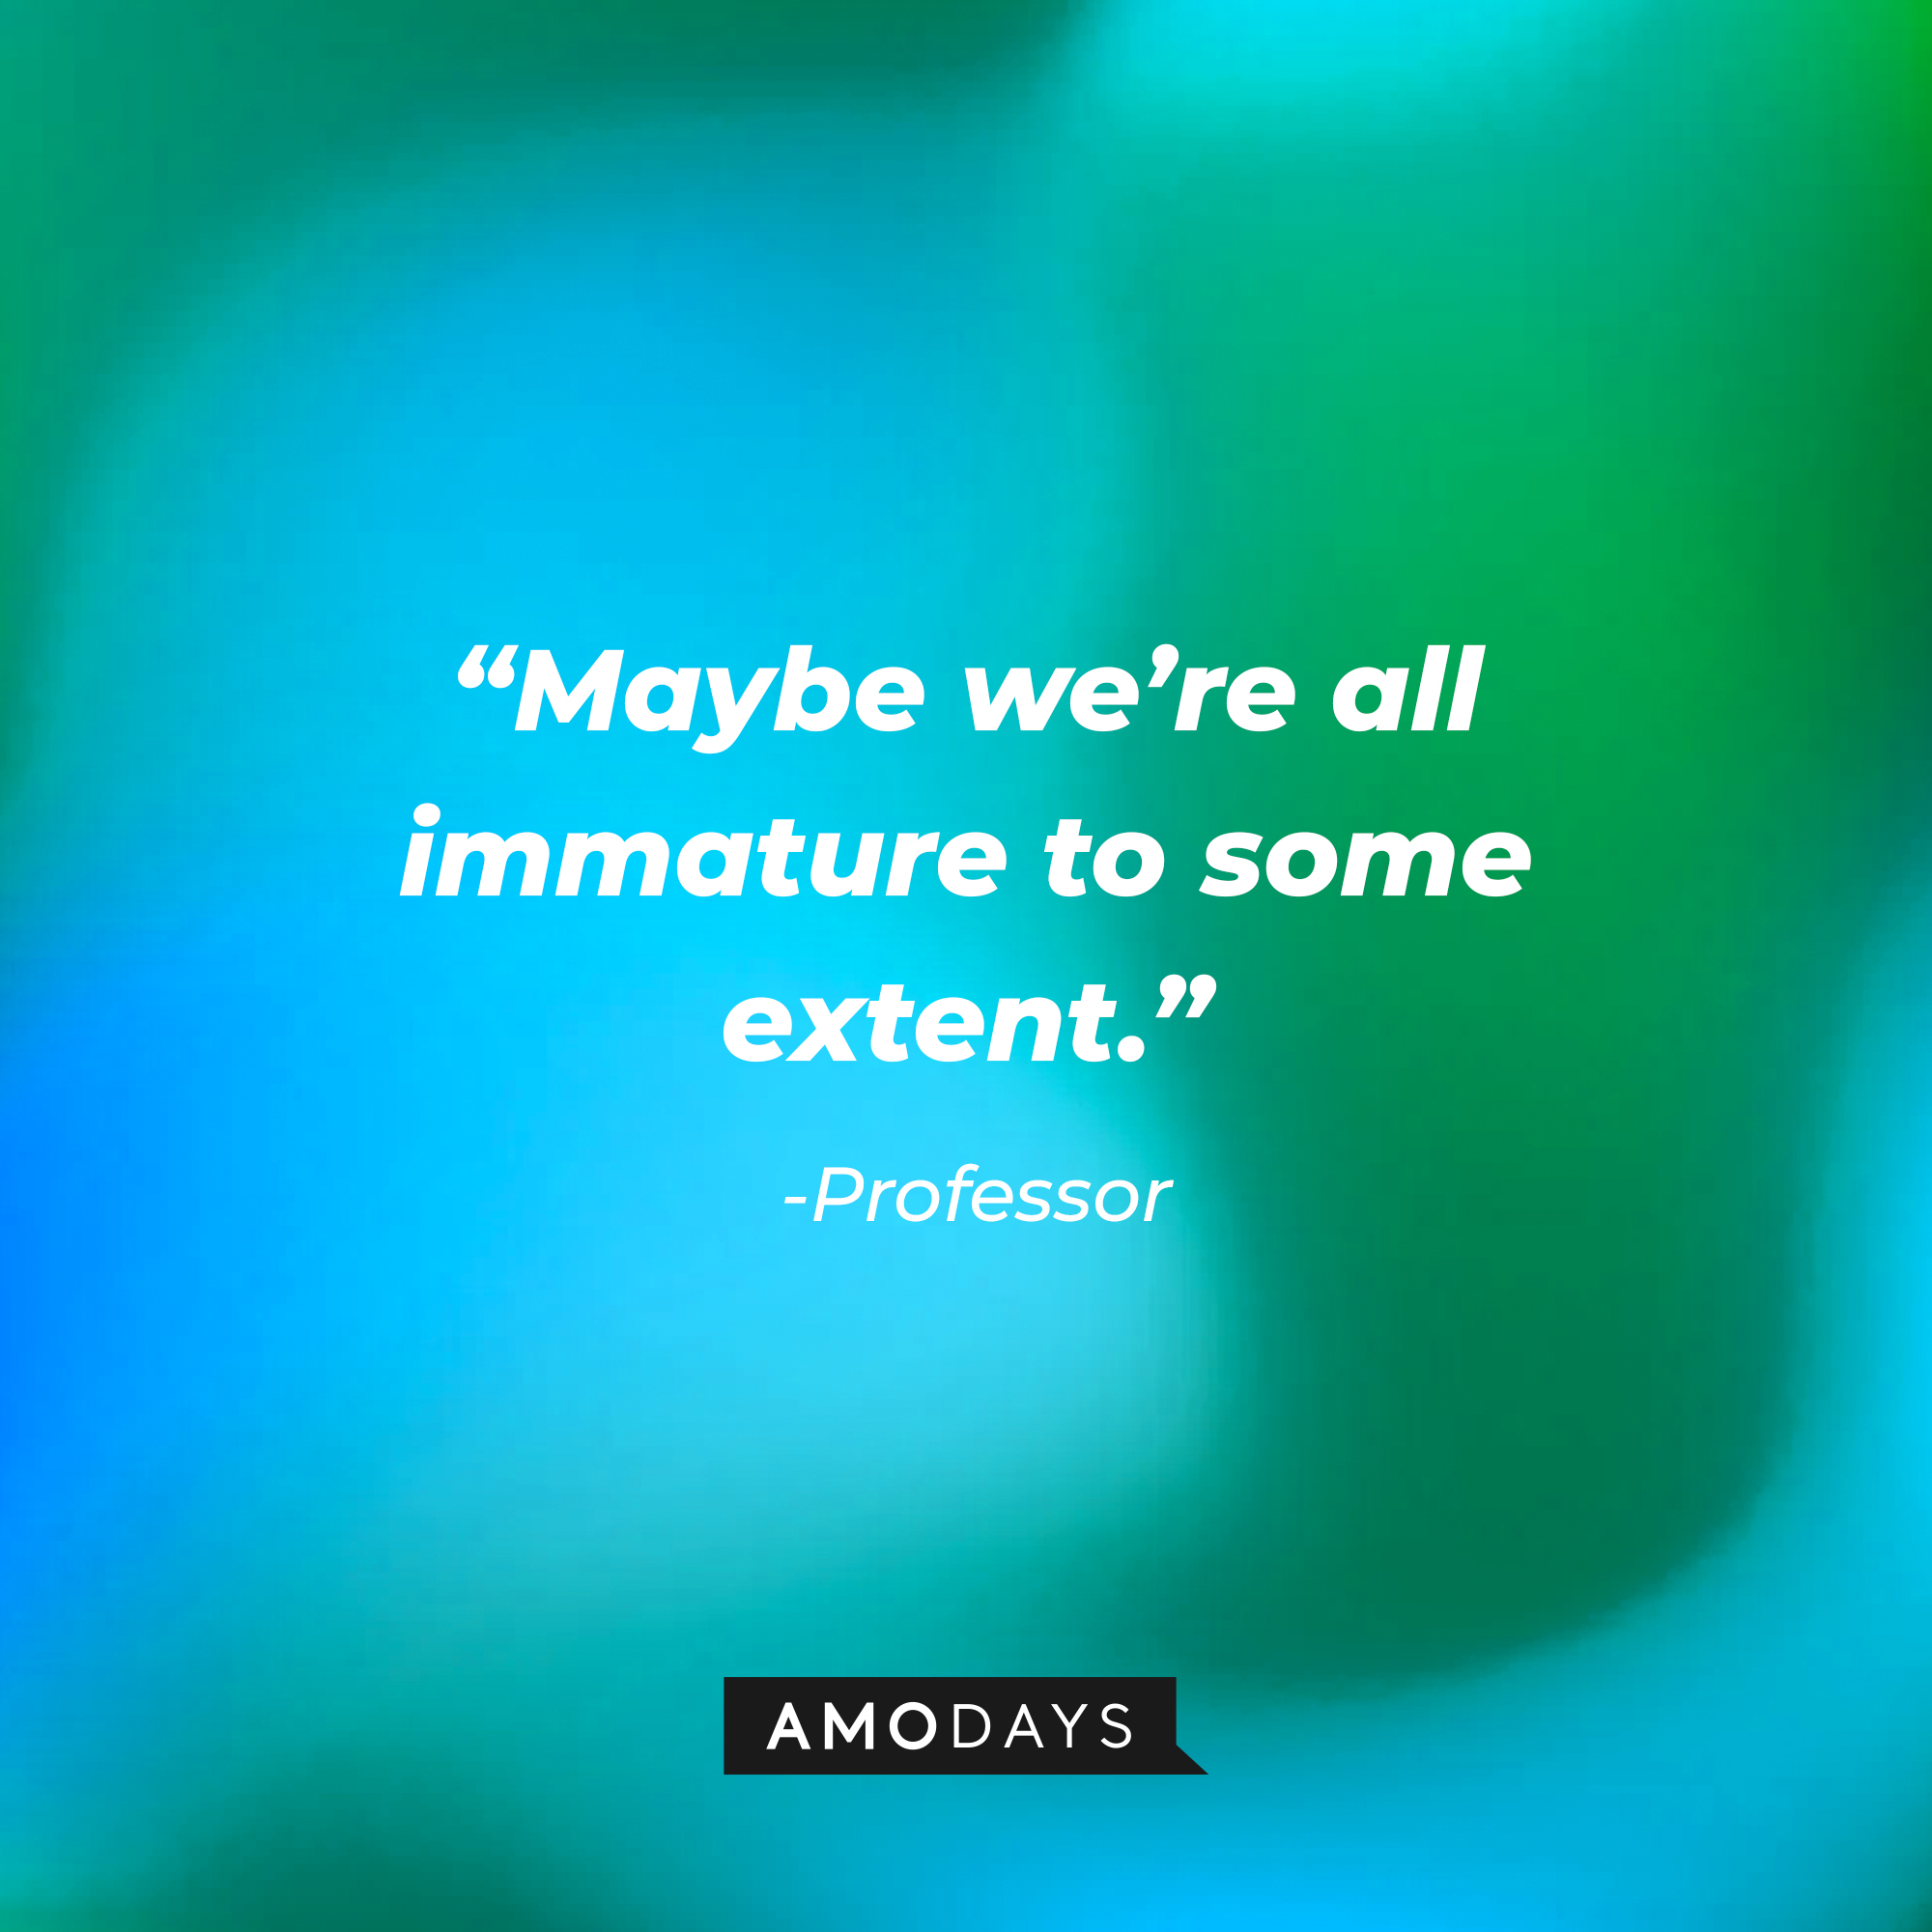 Professor’s  quote: “Maybe we’re all immature to some extent.” | Source: AmoDays